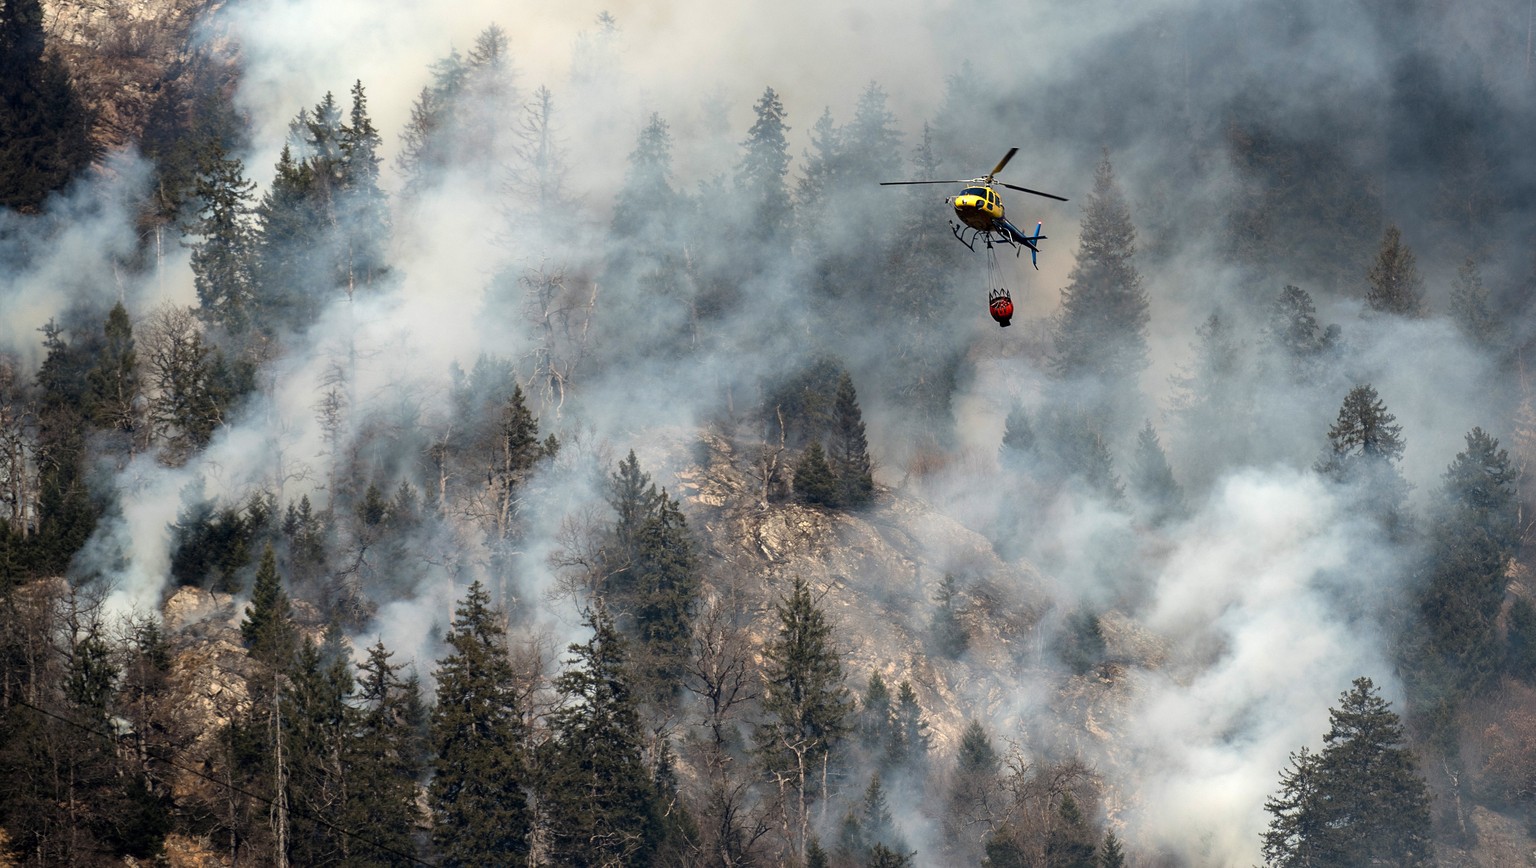 A fire fighting helicopter discharges water over the forest fires near Mesocco in Southern Switzerland, Wednesday, December 28, 2016. (KEYSTONE/Ti-Press/Gabriele Putzu)